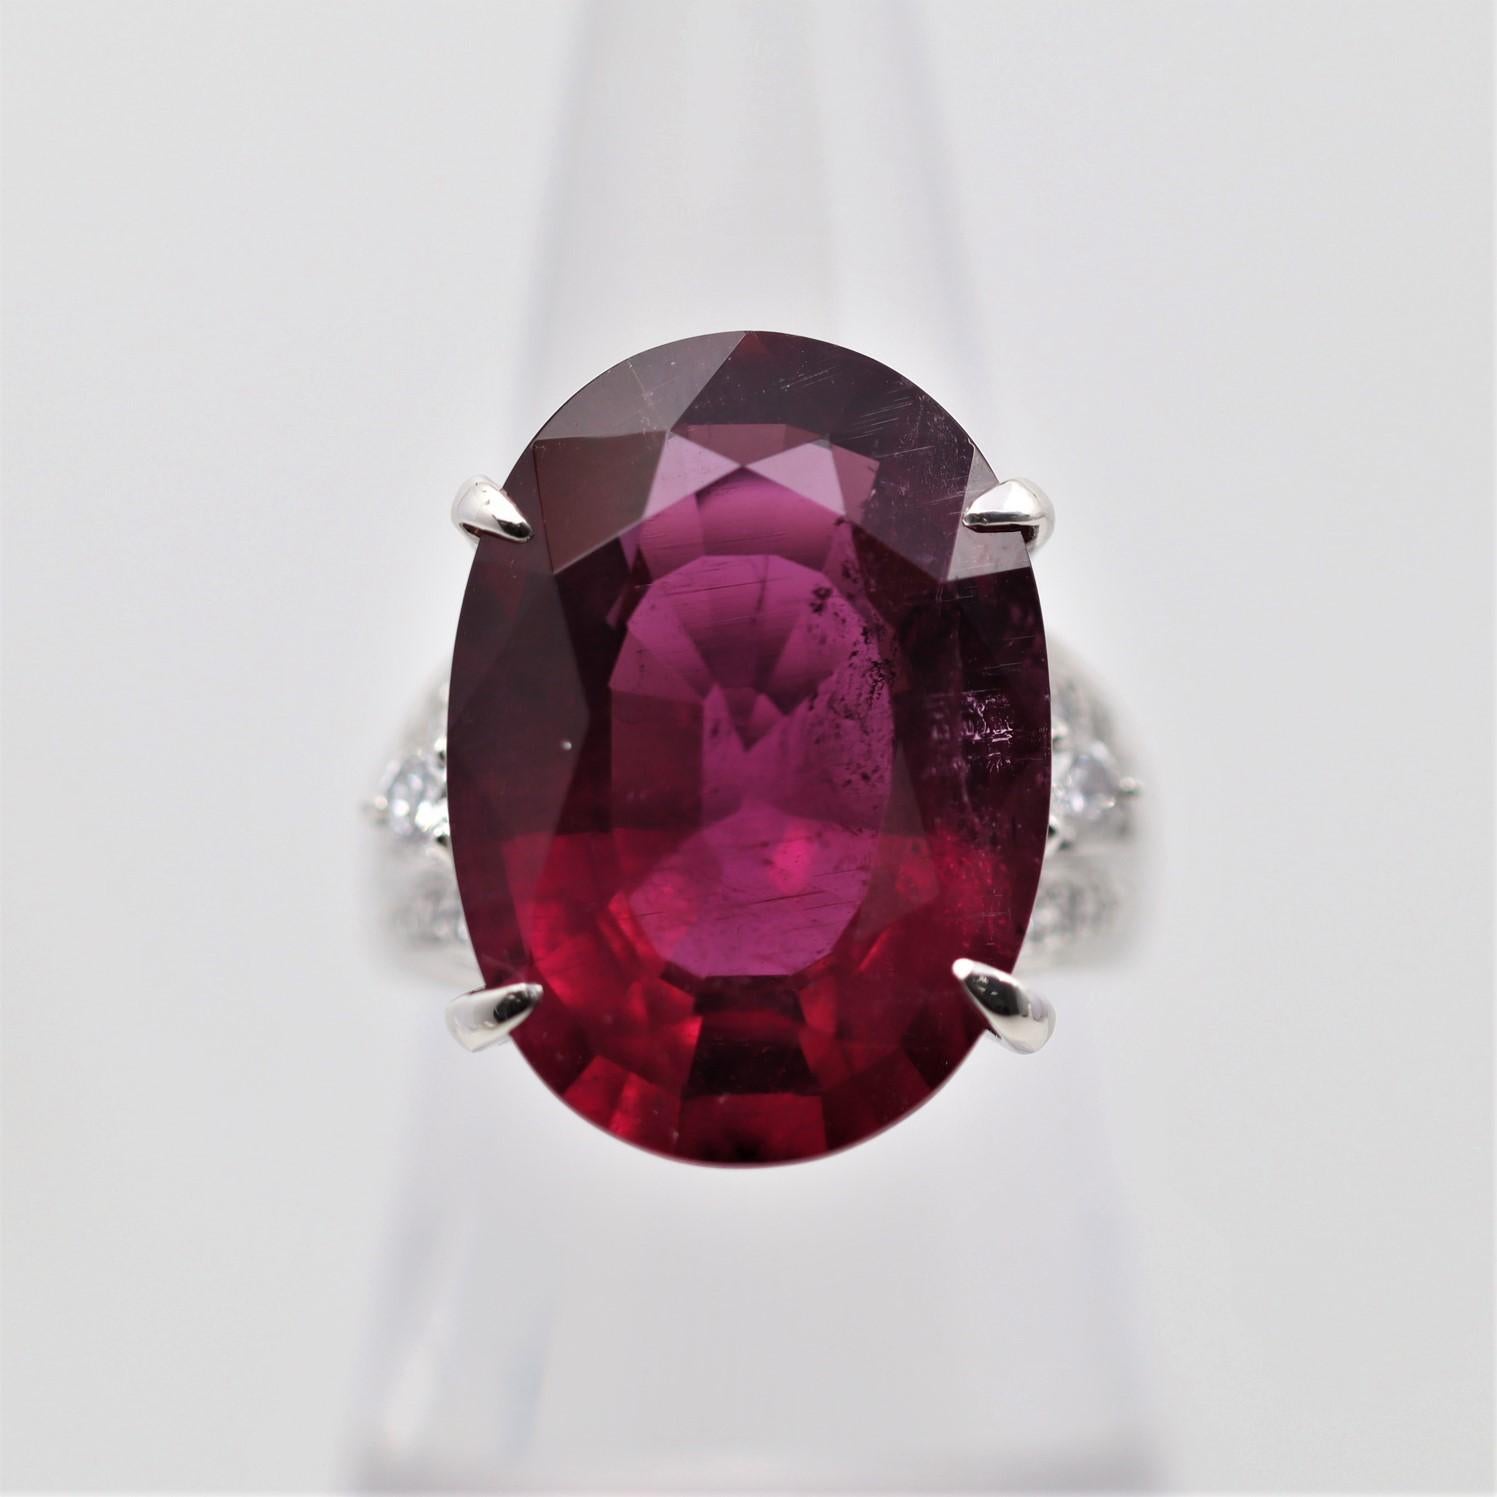 A large and impressive ring featuring a substantial 18.48 carat rubellite tourmaline. It has a deep jelly red color that will leave you smiling. It is complemented by 0.43 carats of diamonds set on its shoulders. Hand-fabricated in platinum and